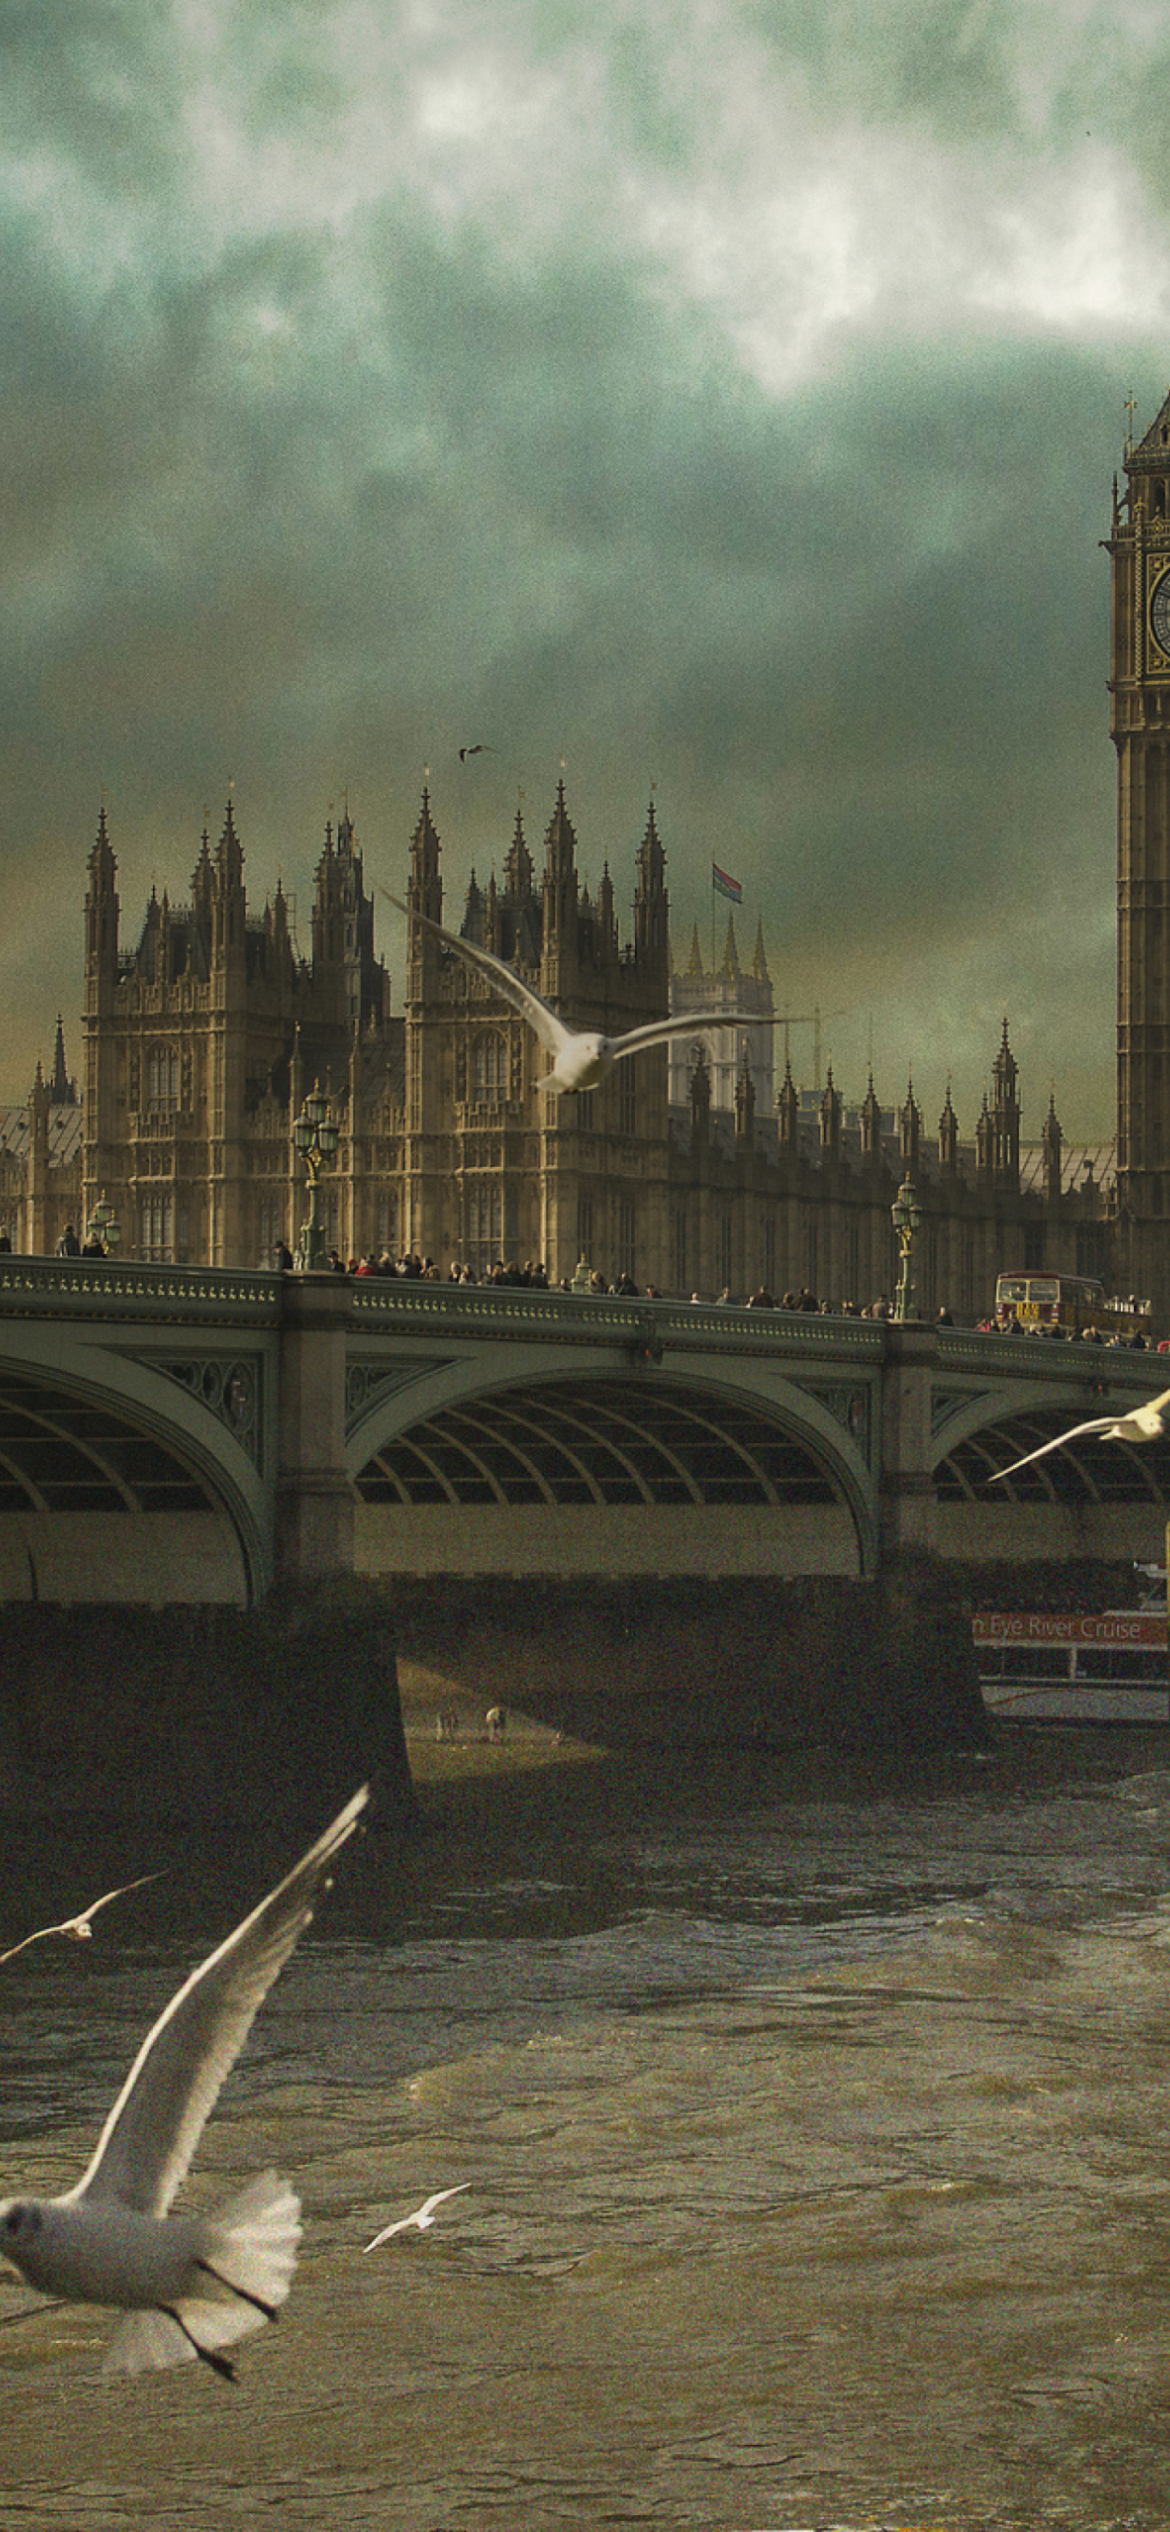 Dramatic Big Ben And Seagulls In London England wallpaper 1170x2532